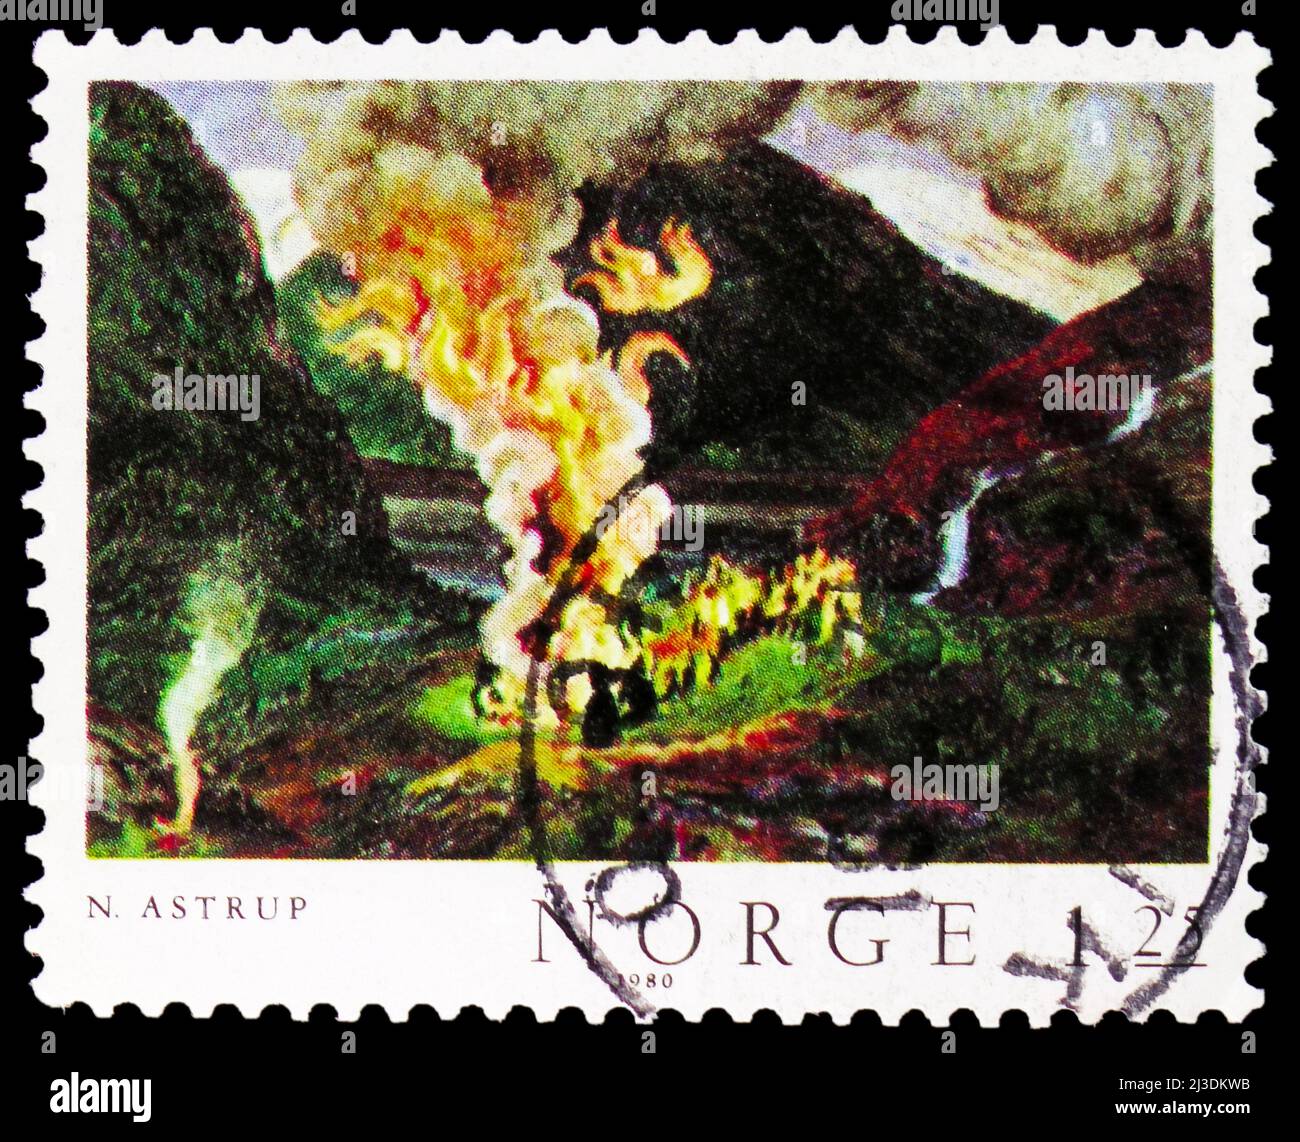 MOSCOW, RUSSIA - MARCH 26, 2022: Postage stamp printed in Norway shows Midsummer Night, Nikolai Astrup (1912/26), Paintings 1980 serie, circa 1980 Stock Photo